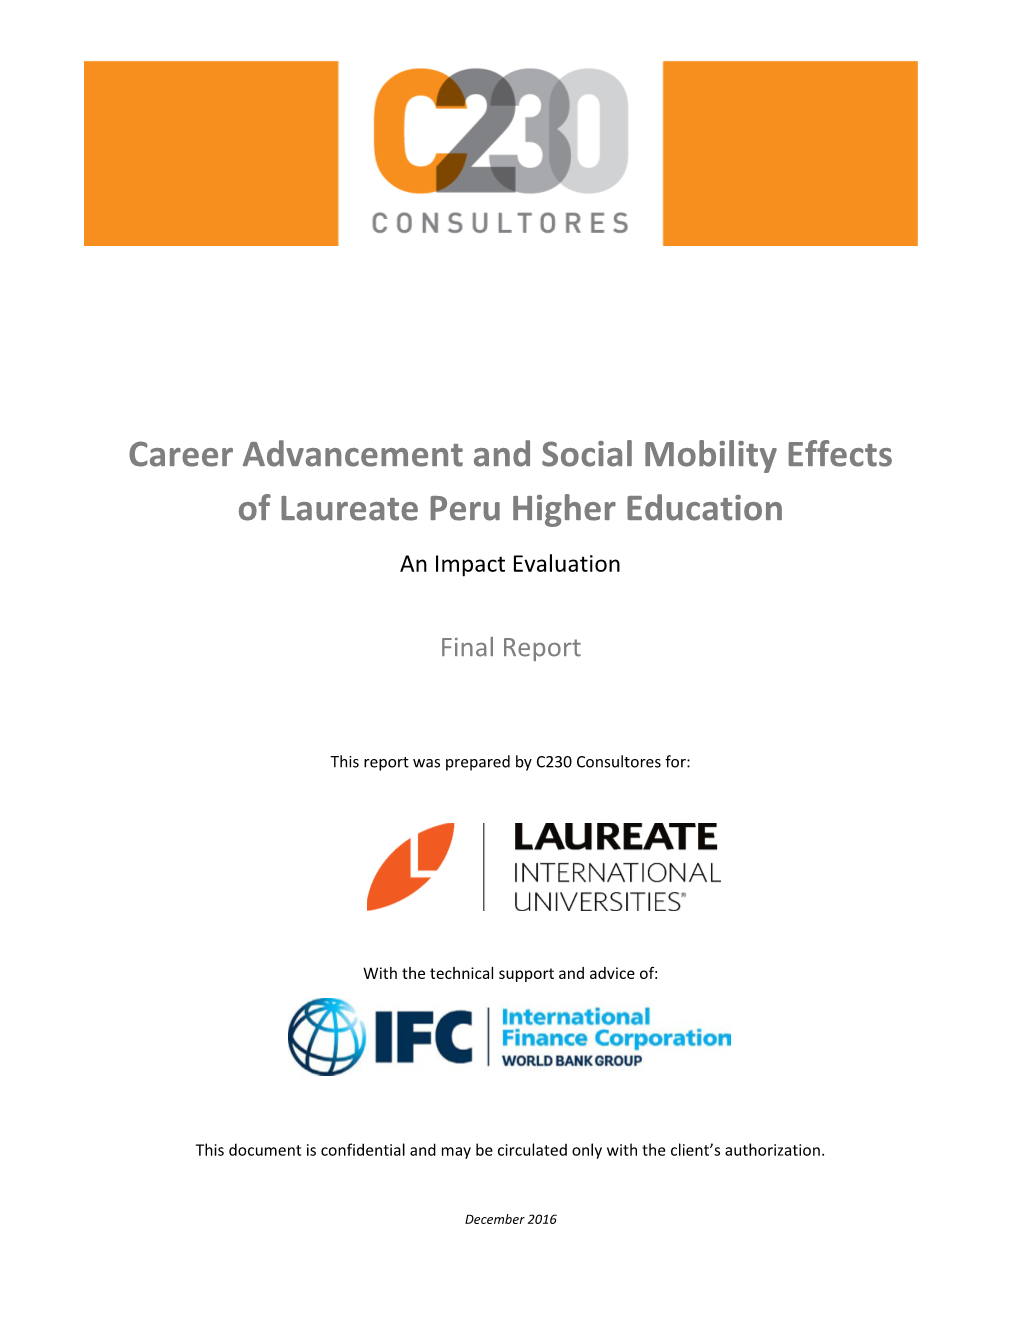 Career Advancement and Social Mobility Effects of Laureate Peru Higher Education